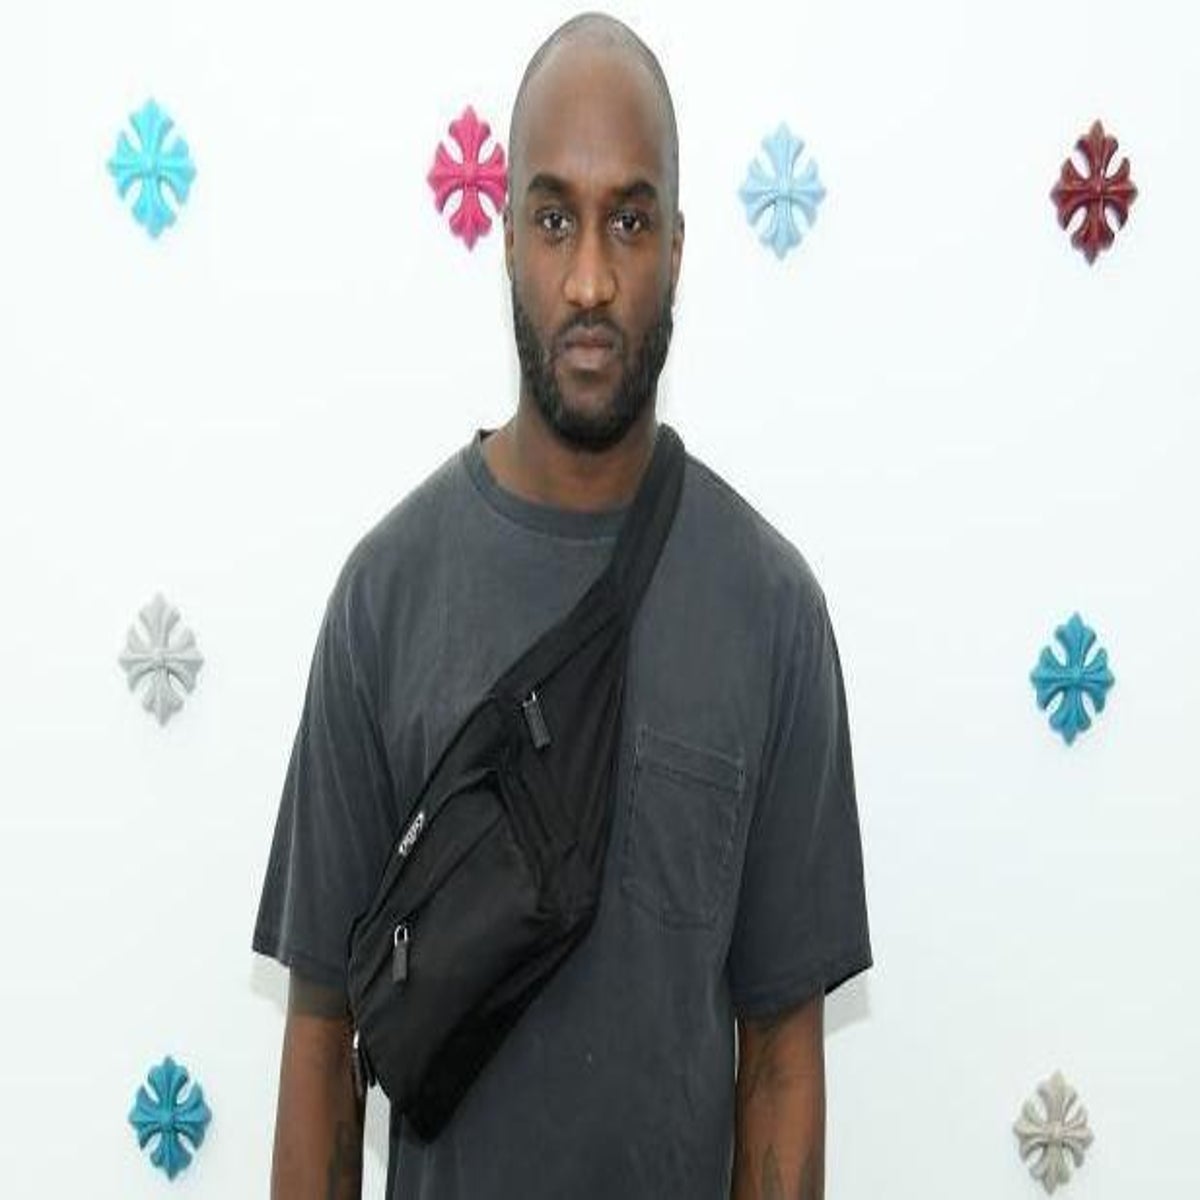 Louis Vuitton Bags for Men: Male Celebrities With LV Bags - Kanye